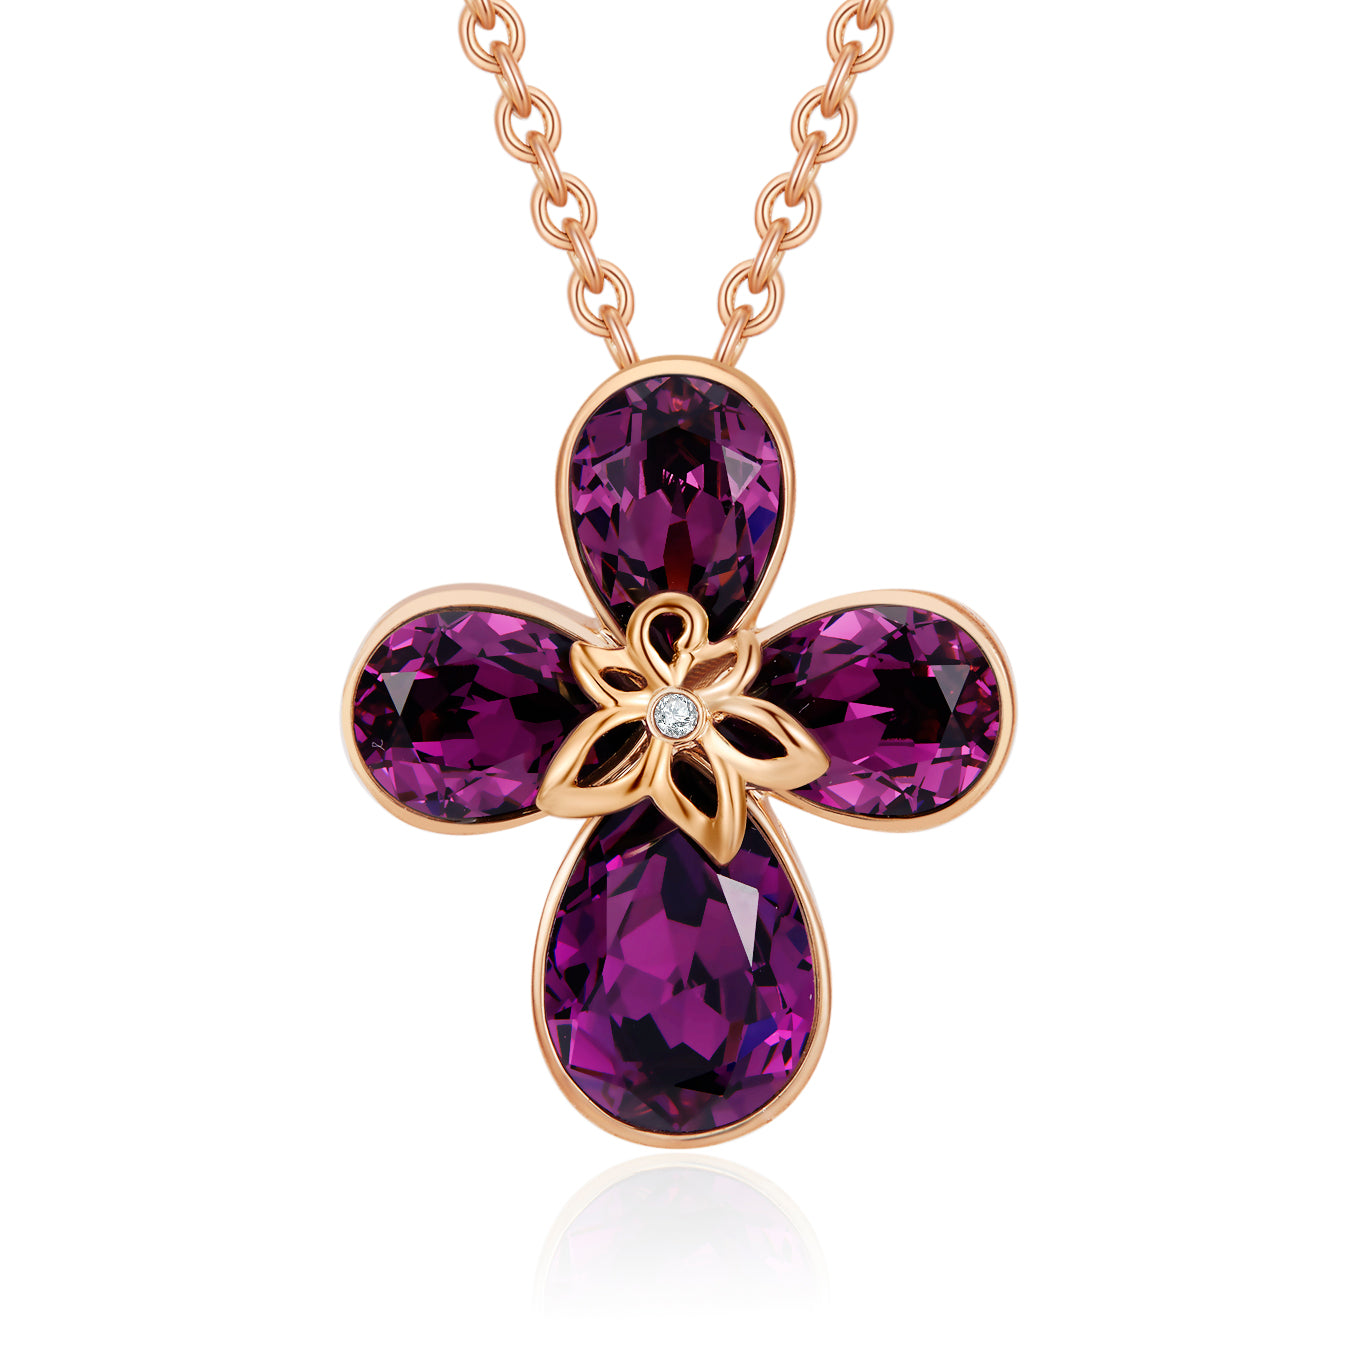 VICACCI Rose gold Four Leaf Clover Necklace，Embellished with crystals from Swarovski ; Lucky purple crystals